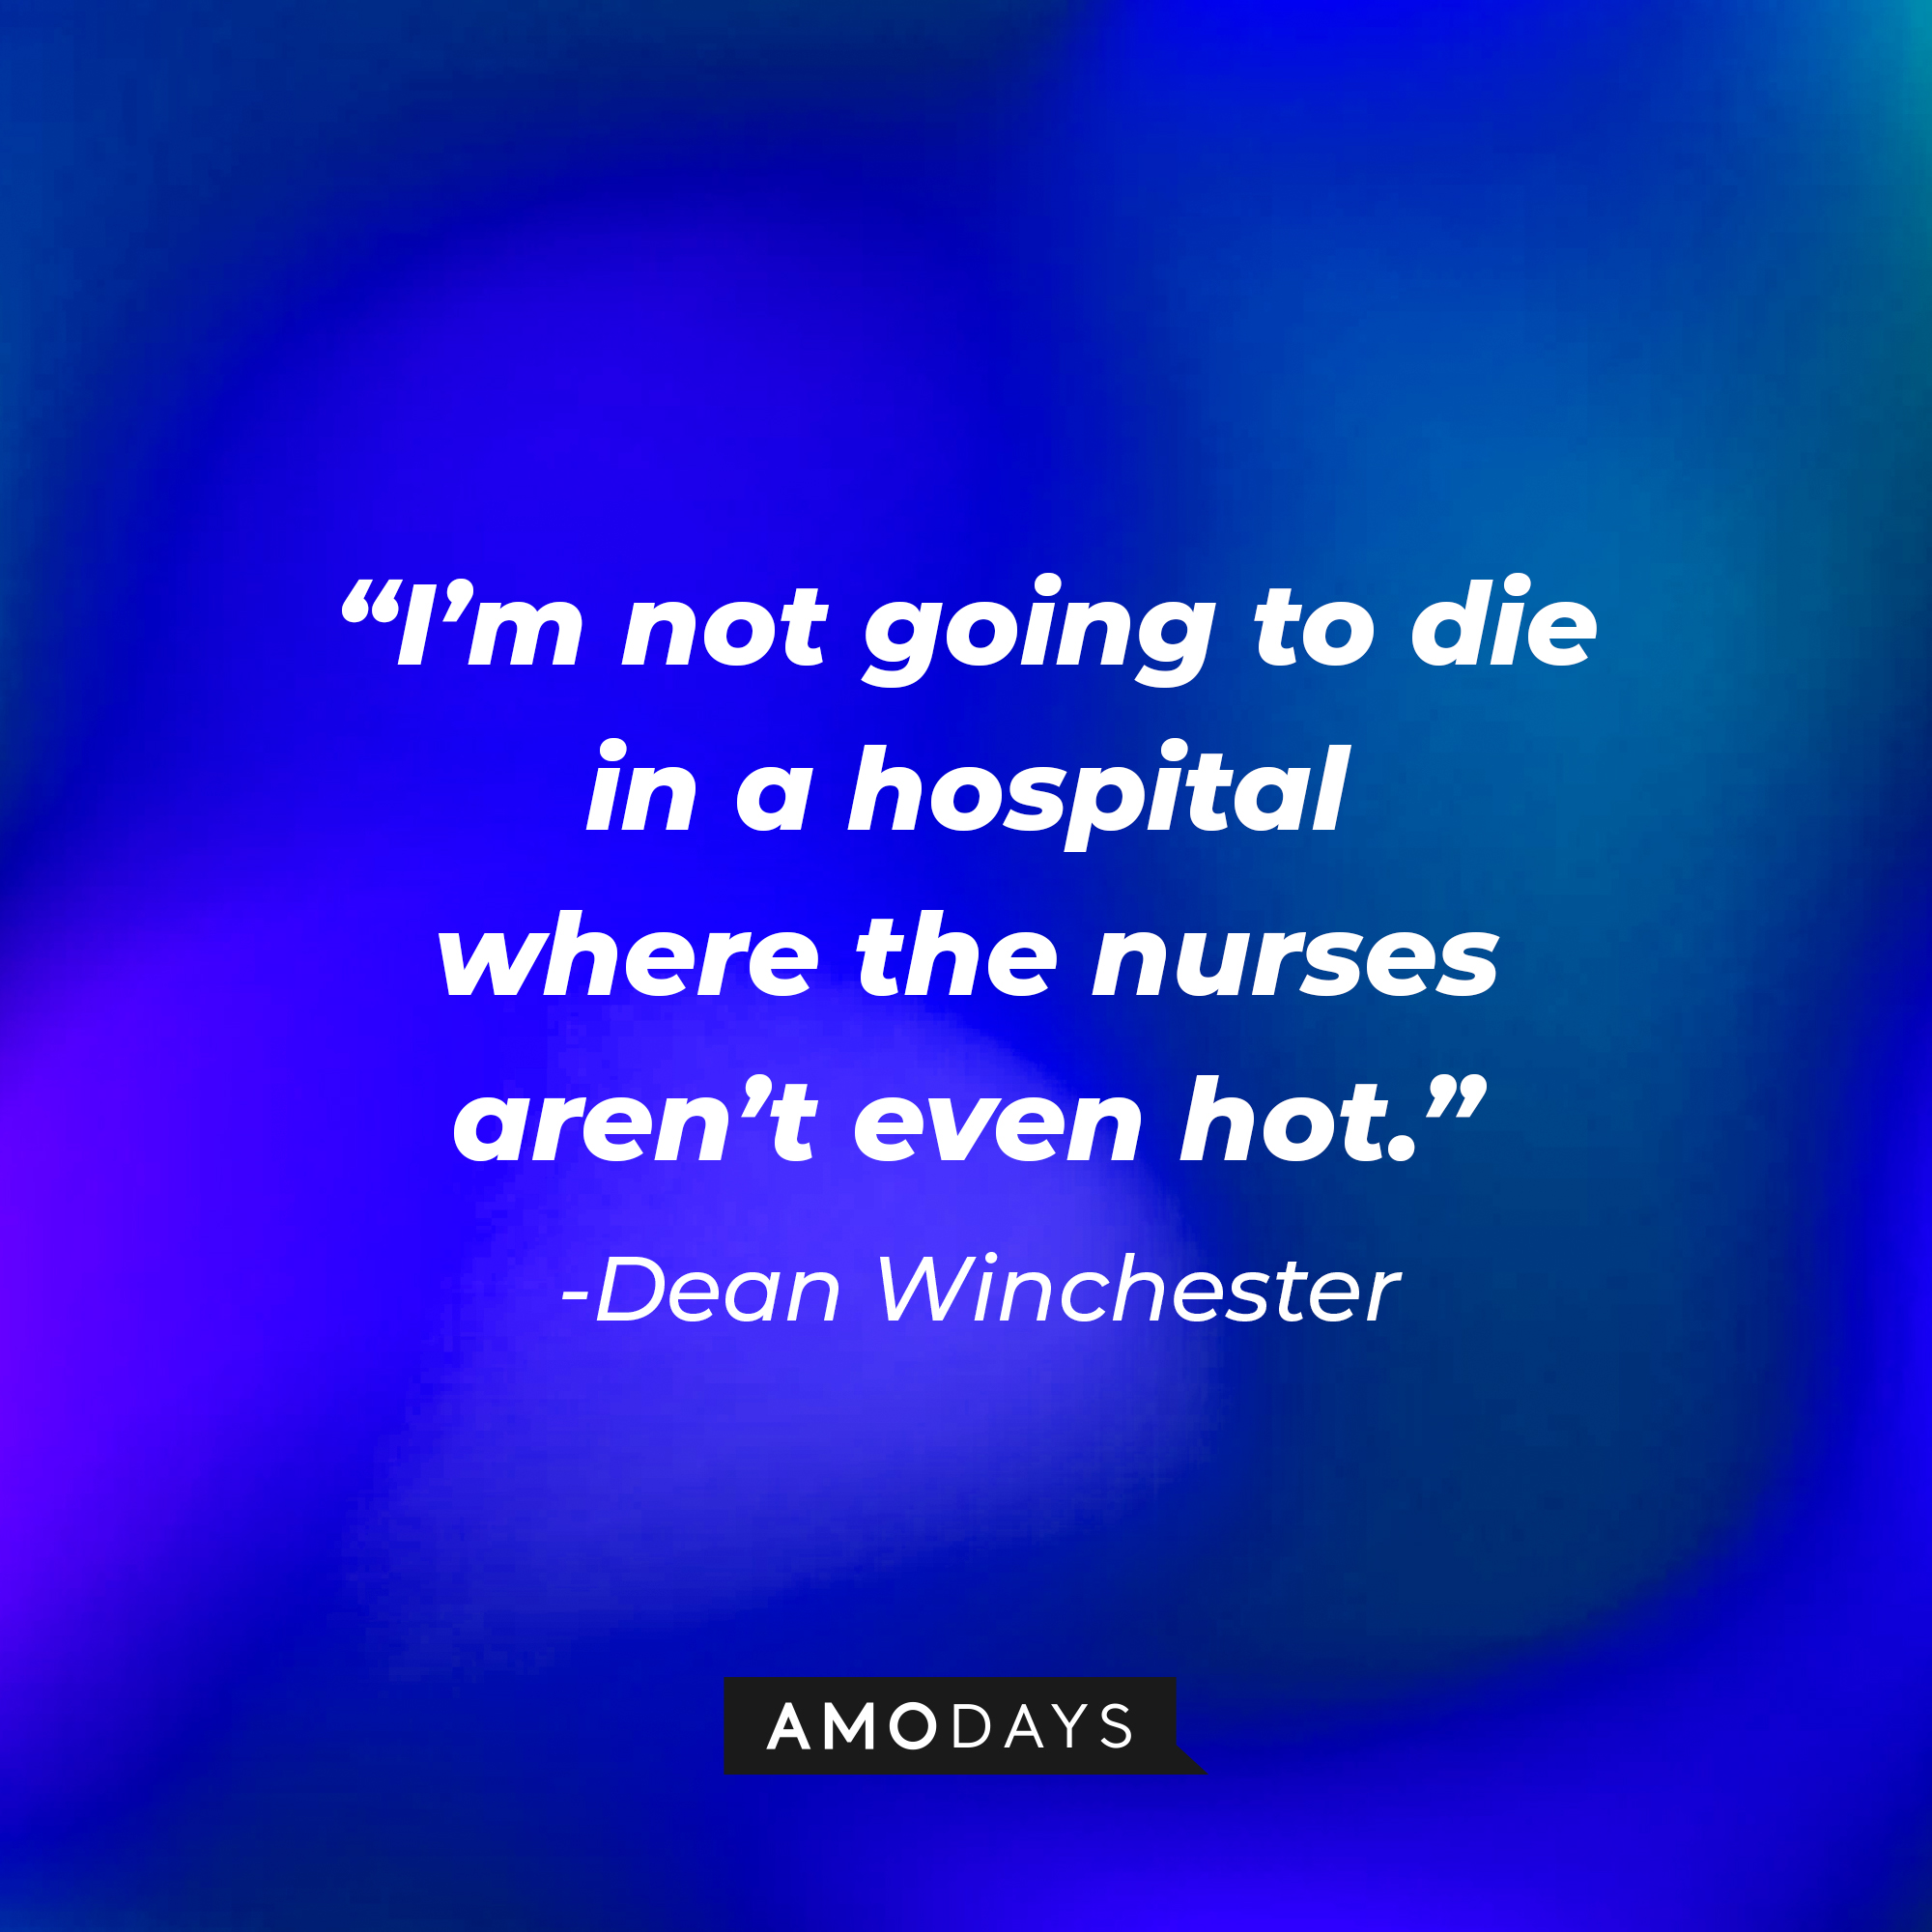 Dean Winchester’s quote: “I’m not going to die in a hospital where the nurses aren’t even hot.”  | Source: AmoDays